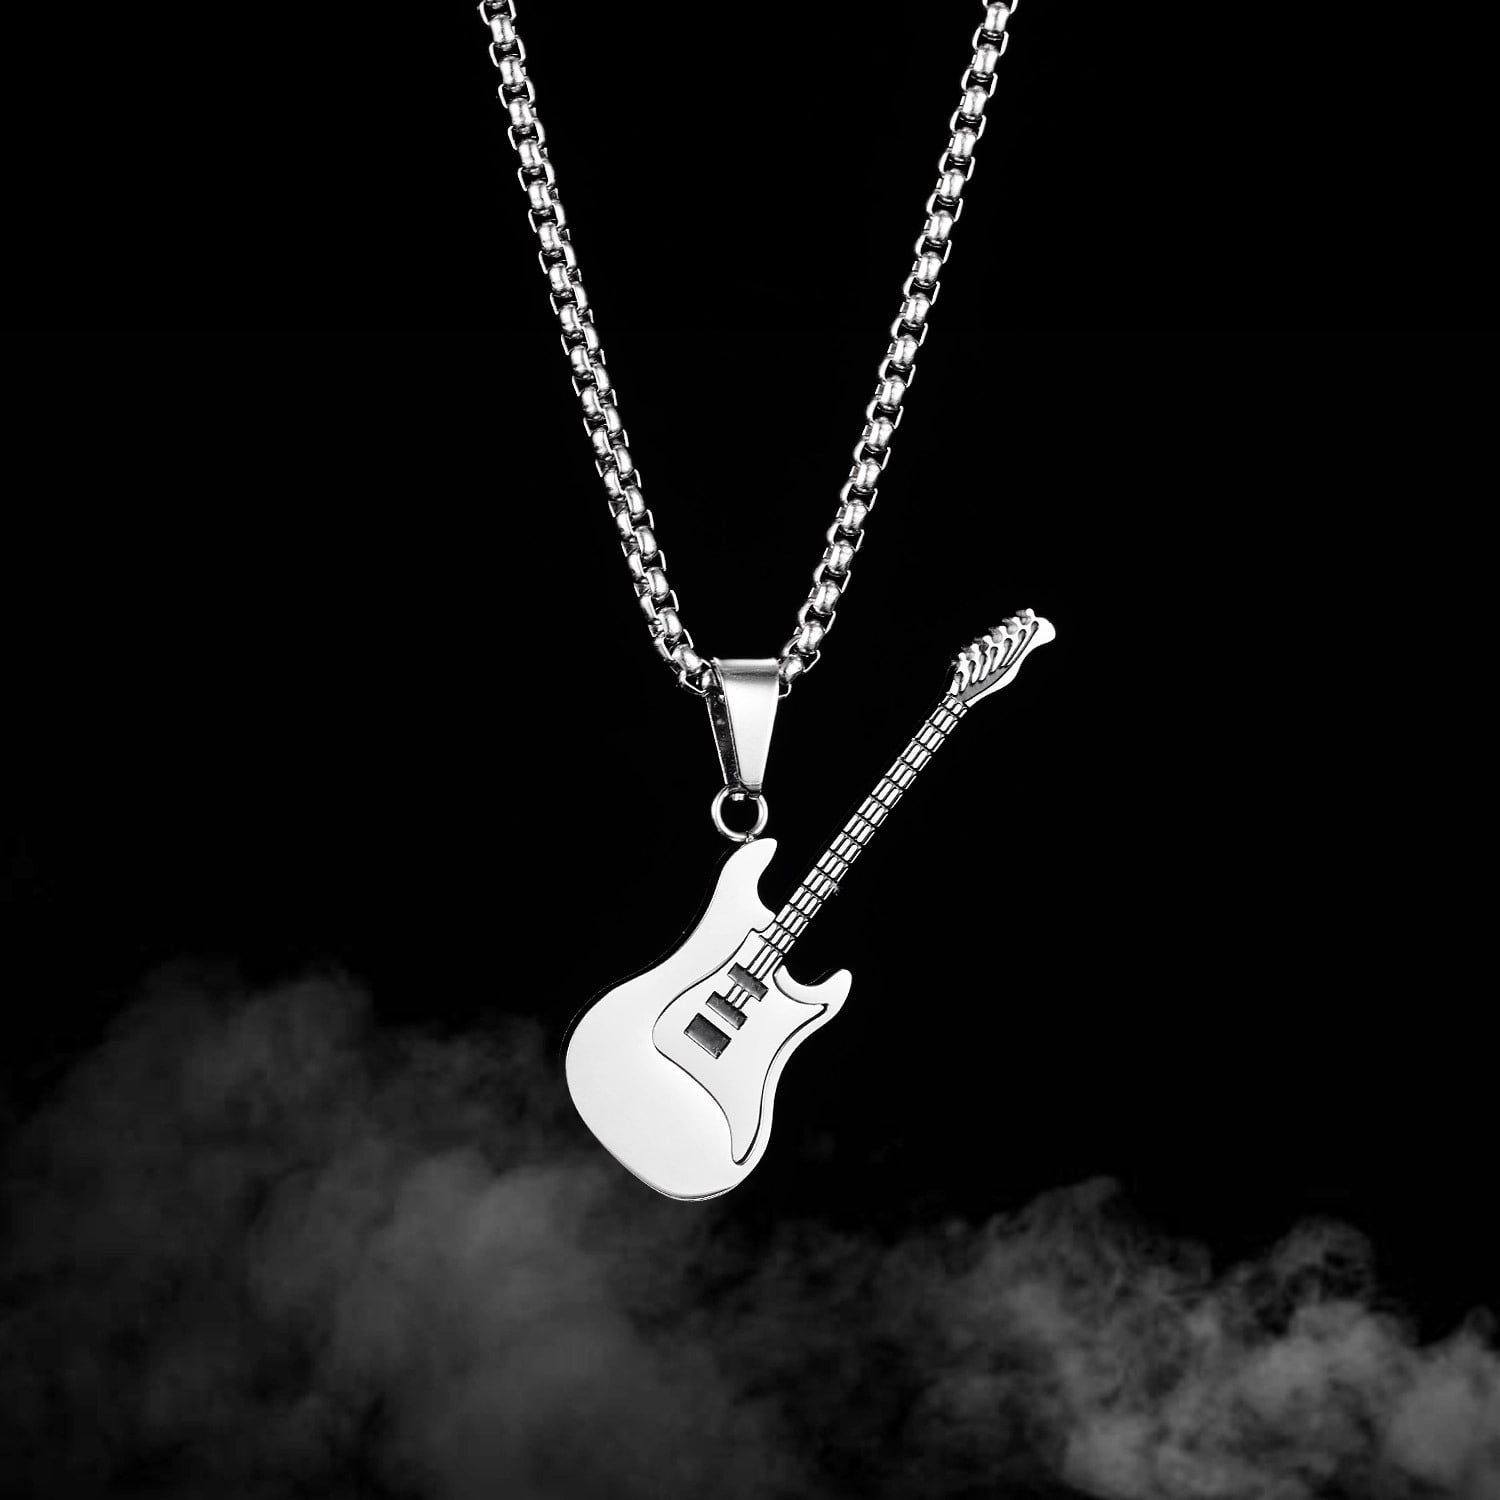 Buy PROSTEEL Stainless Steel Guitar Pick Necklace Men Women Pendant Chain  Punk Rock Music Note Jewelry Gift at Amazon.in